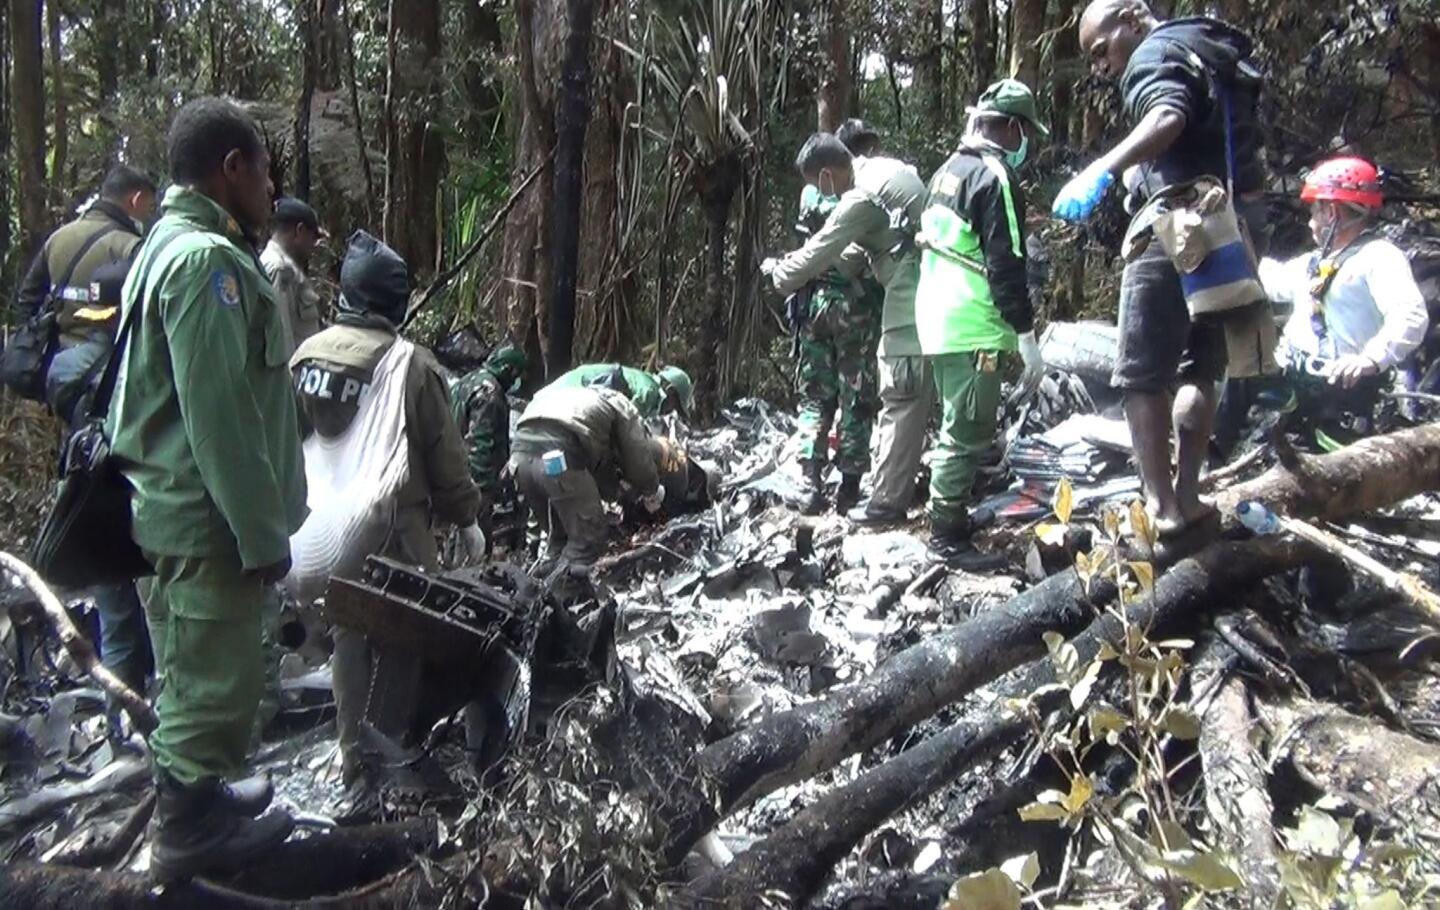 Indonesian rescuers search through wreckage of the Trigana Air ATR 42-300 twin-turboprop plane at the crash site in the mountainous area of Oksibil on Aug. 18, 2015. Fifty-four people died in the crash.